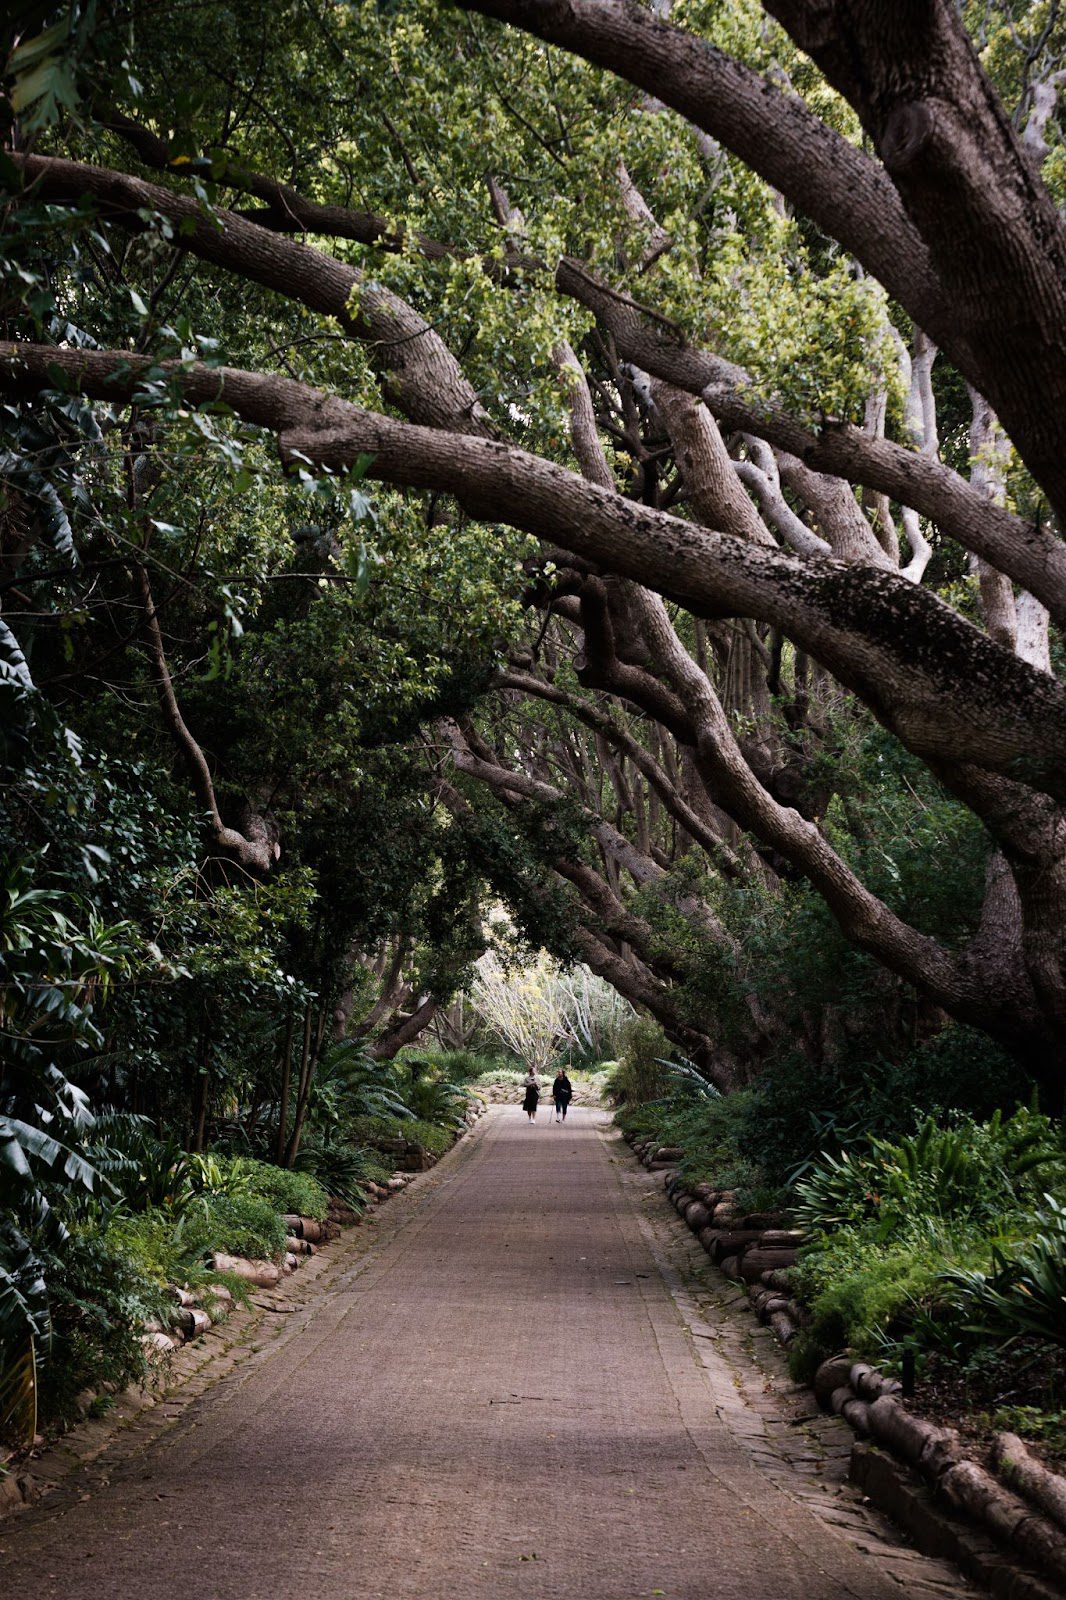 One of the many trails at Kirstenbosch Botanical Gardens